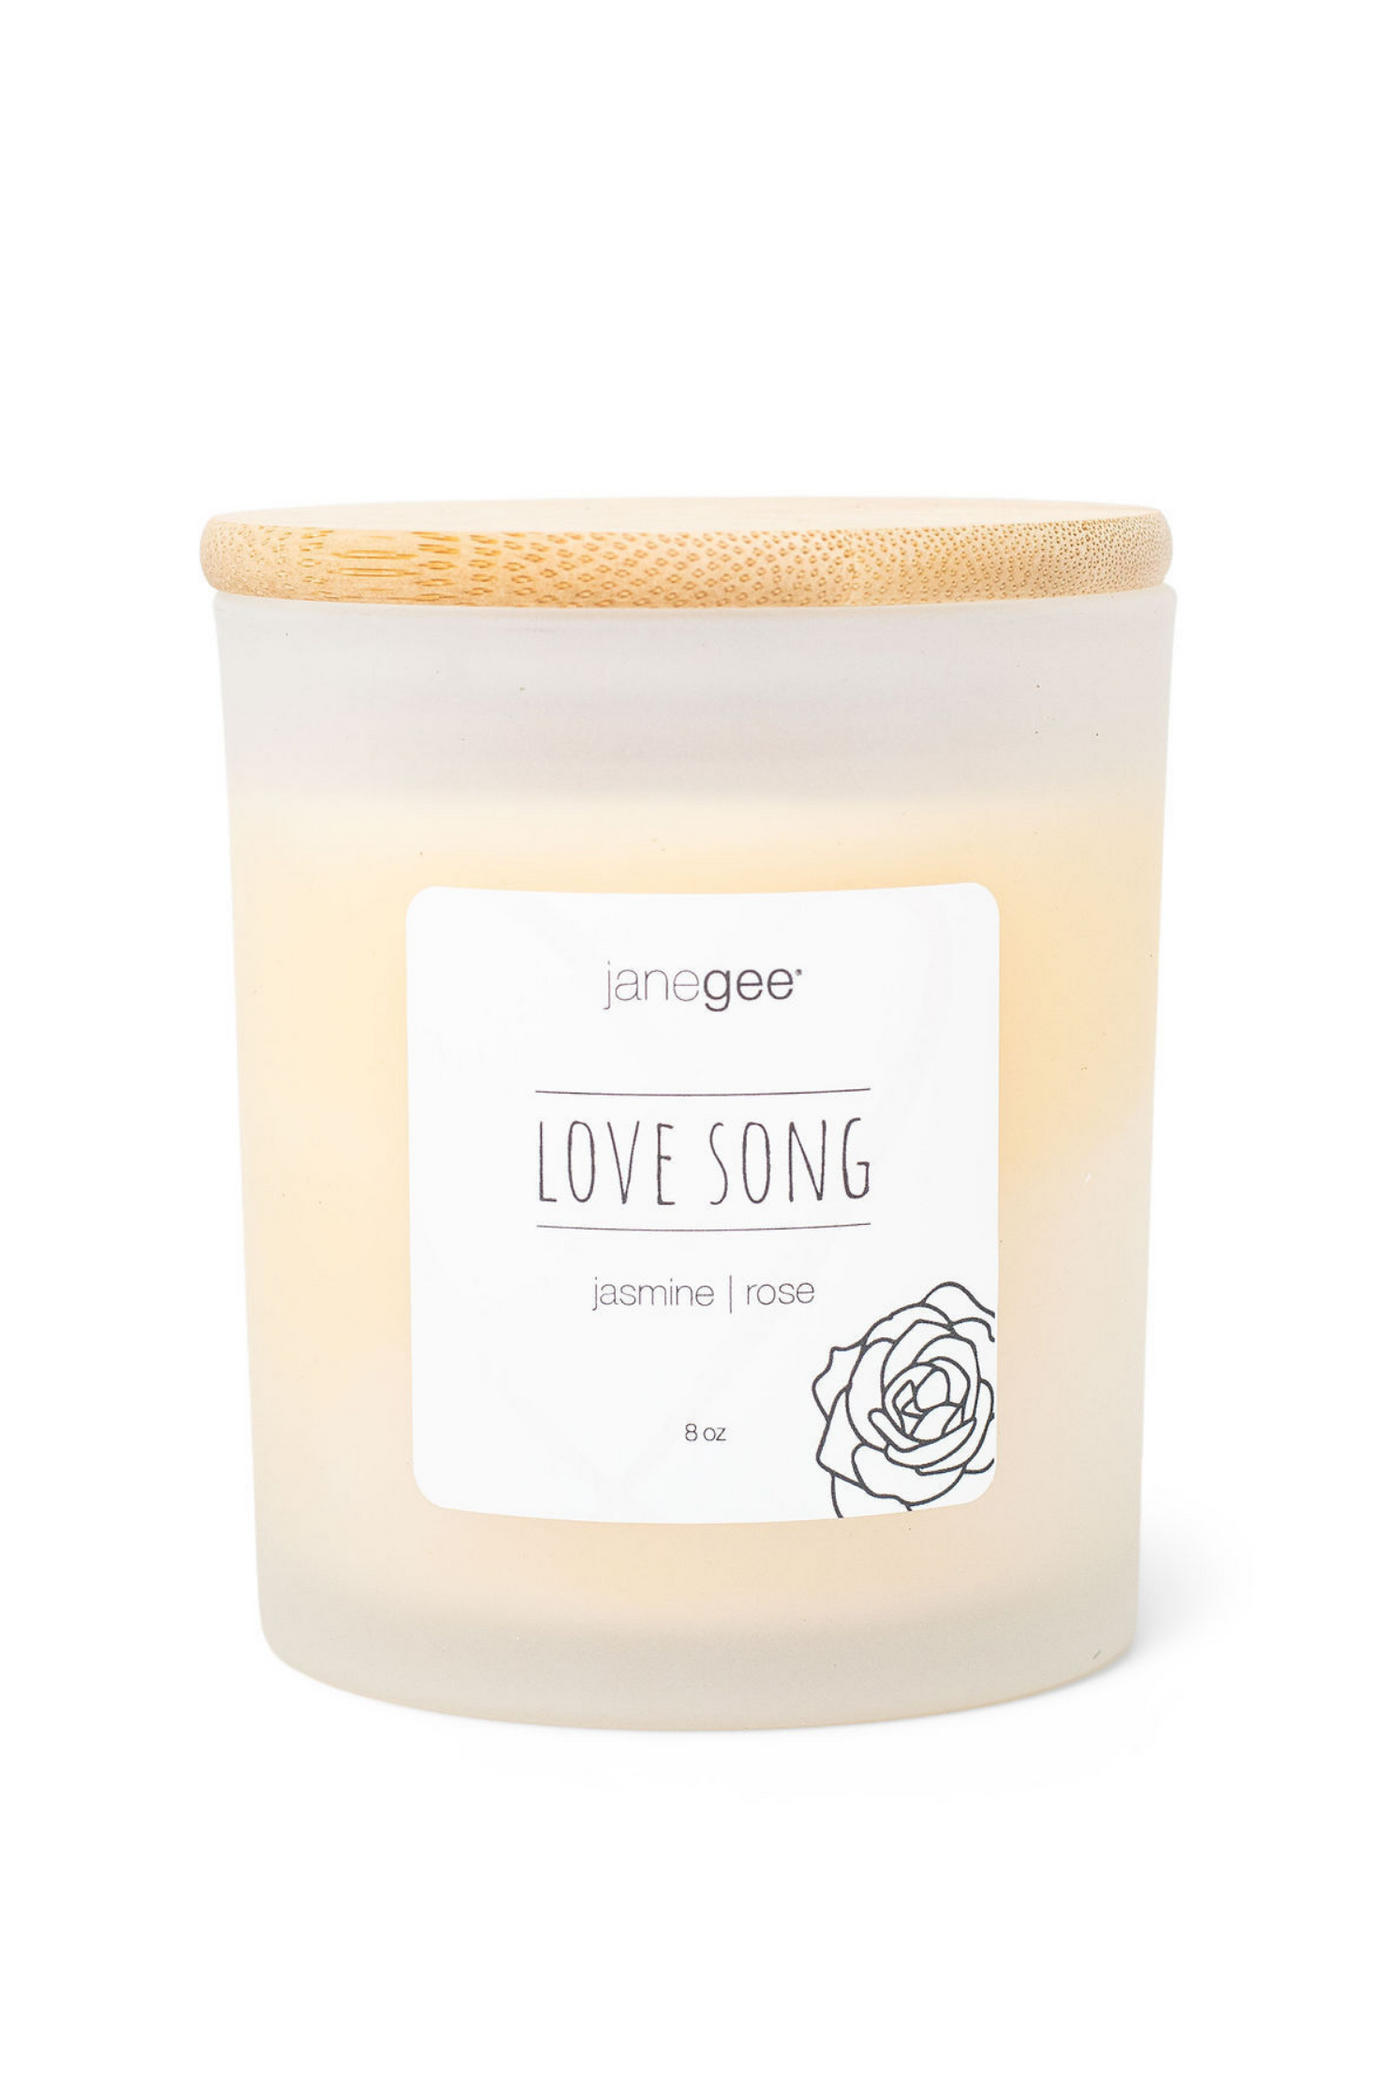 janegee Love Song Aromatherapy Candle